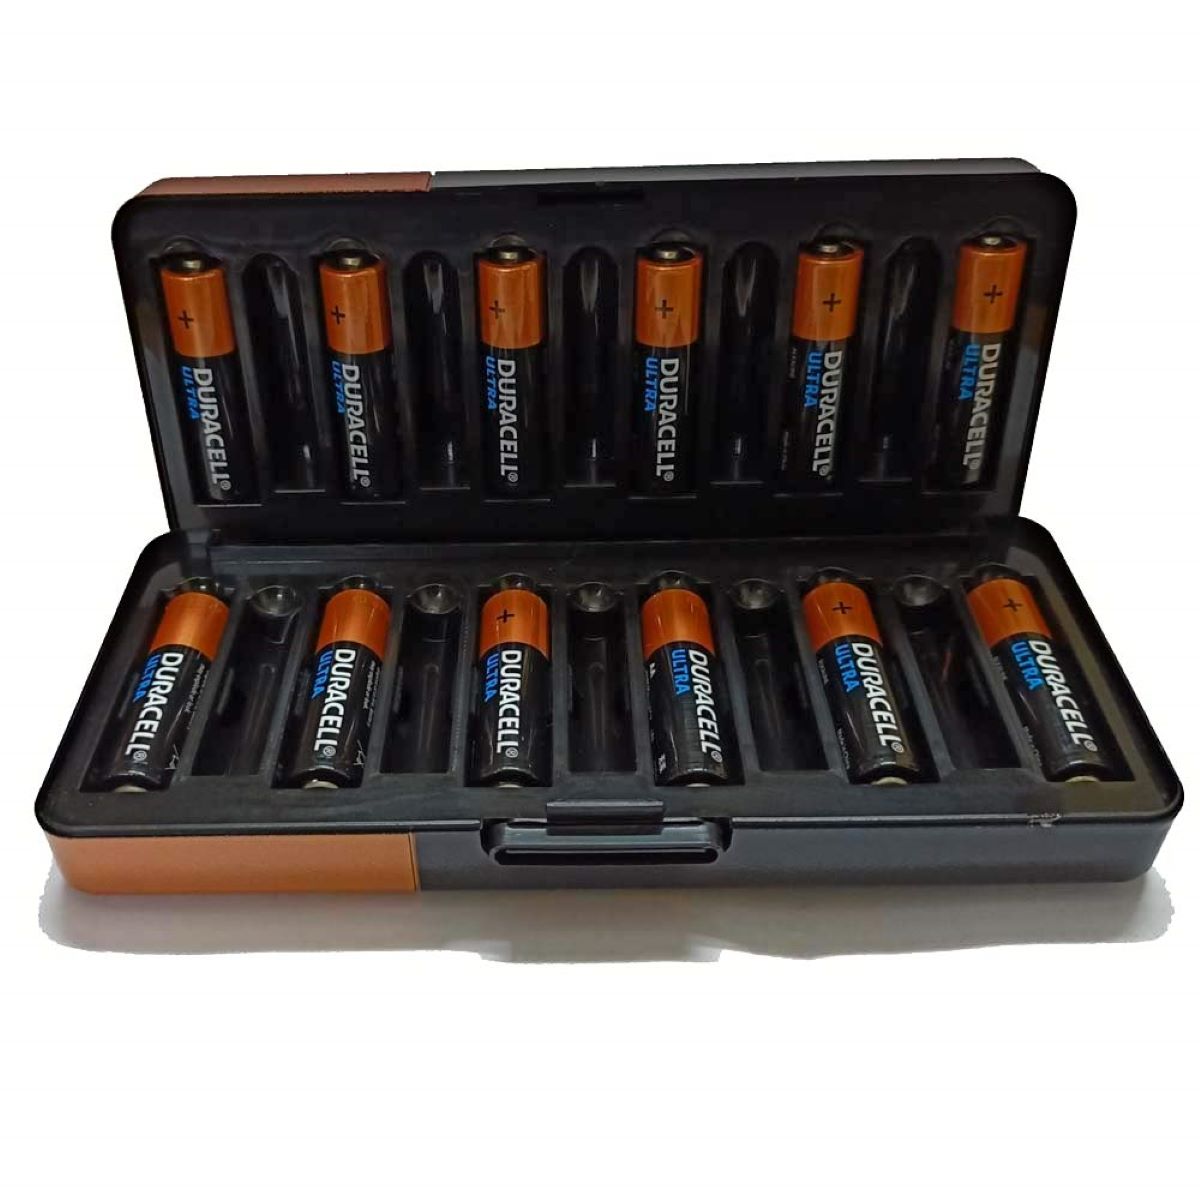 How To Store Duracell Batteries